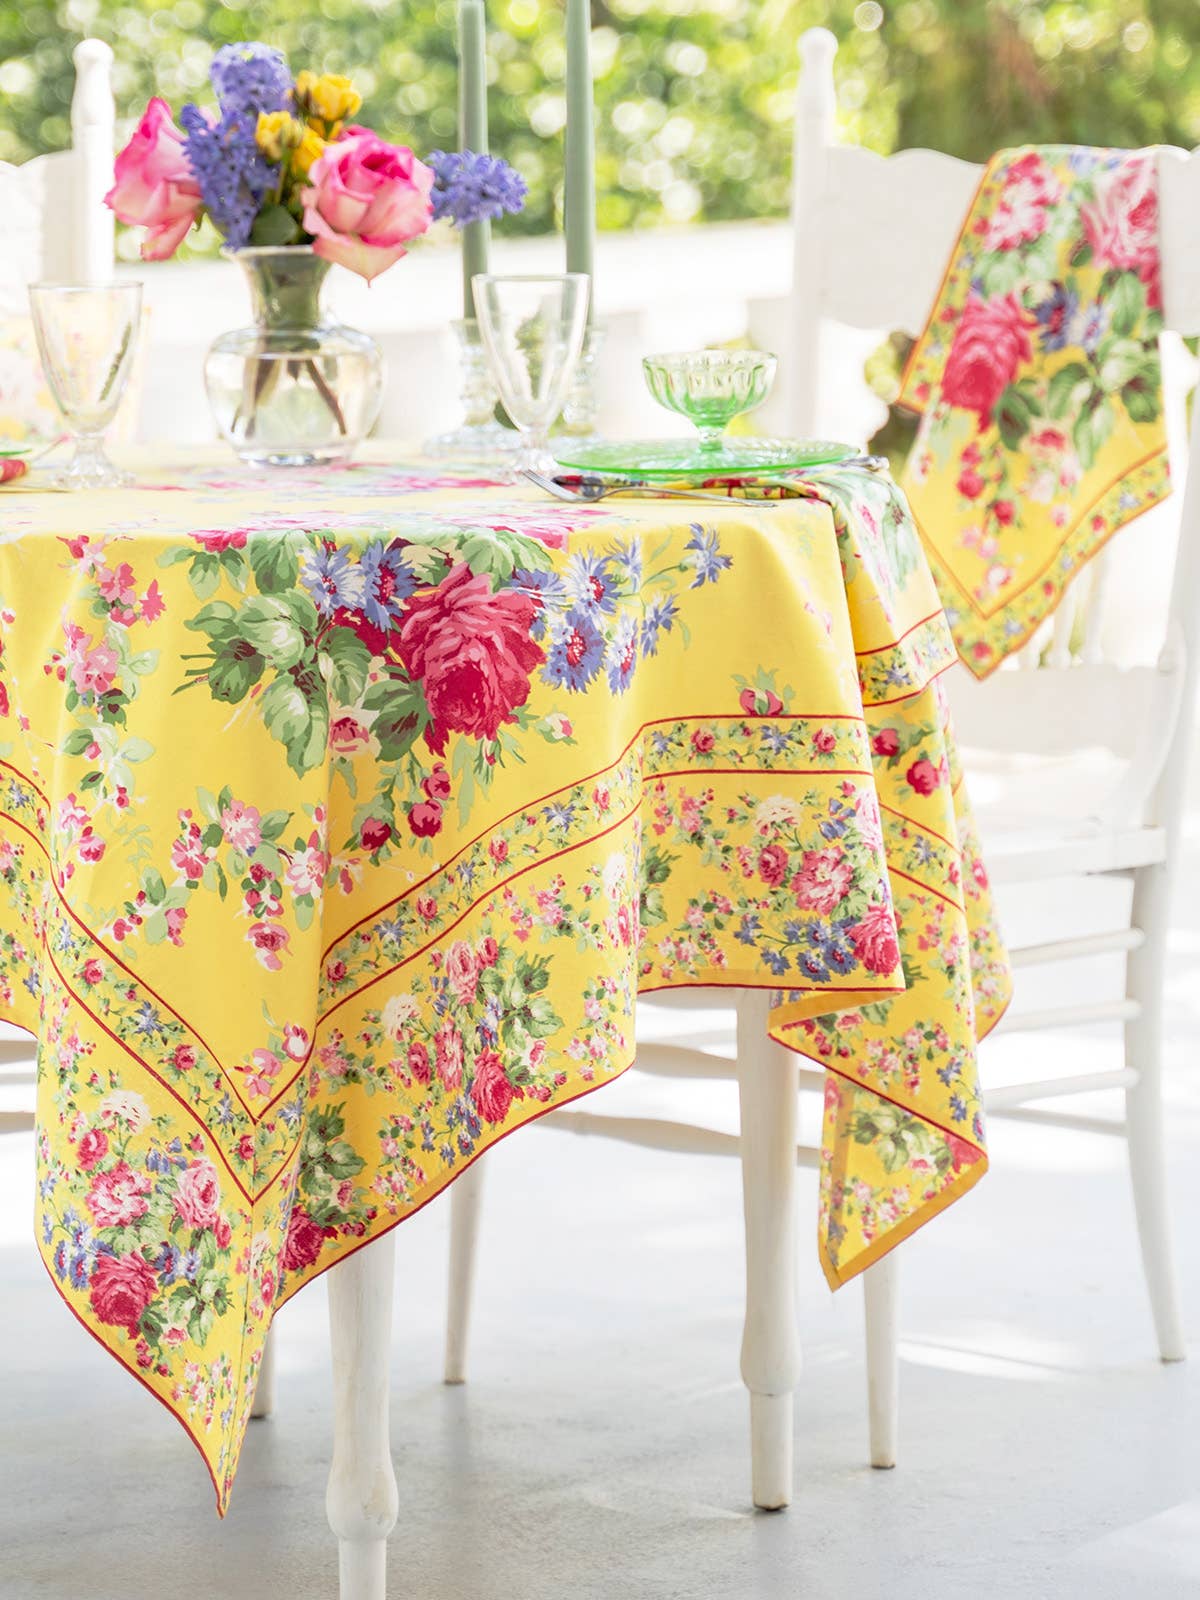 Cottage Rose Tablecloth by April Cornell.